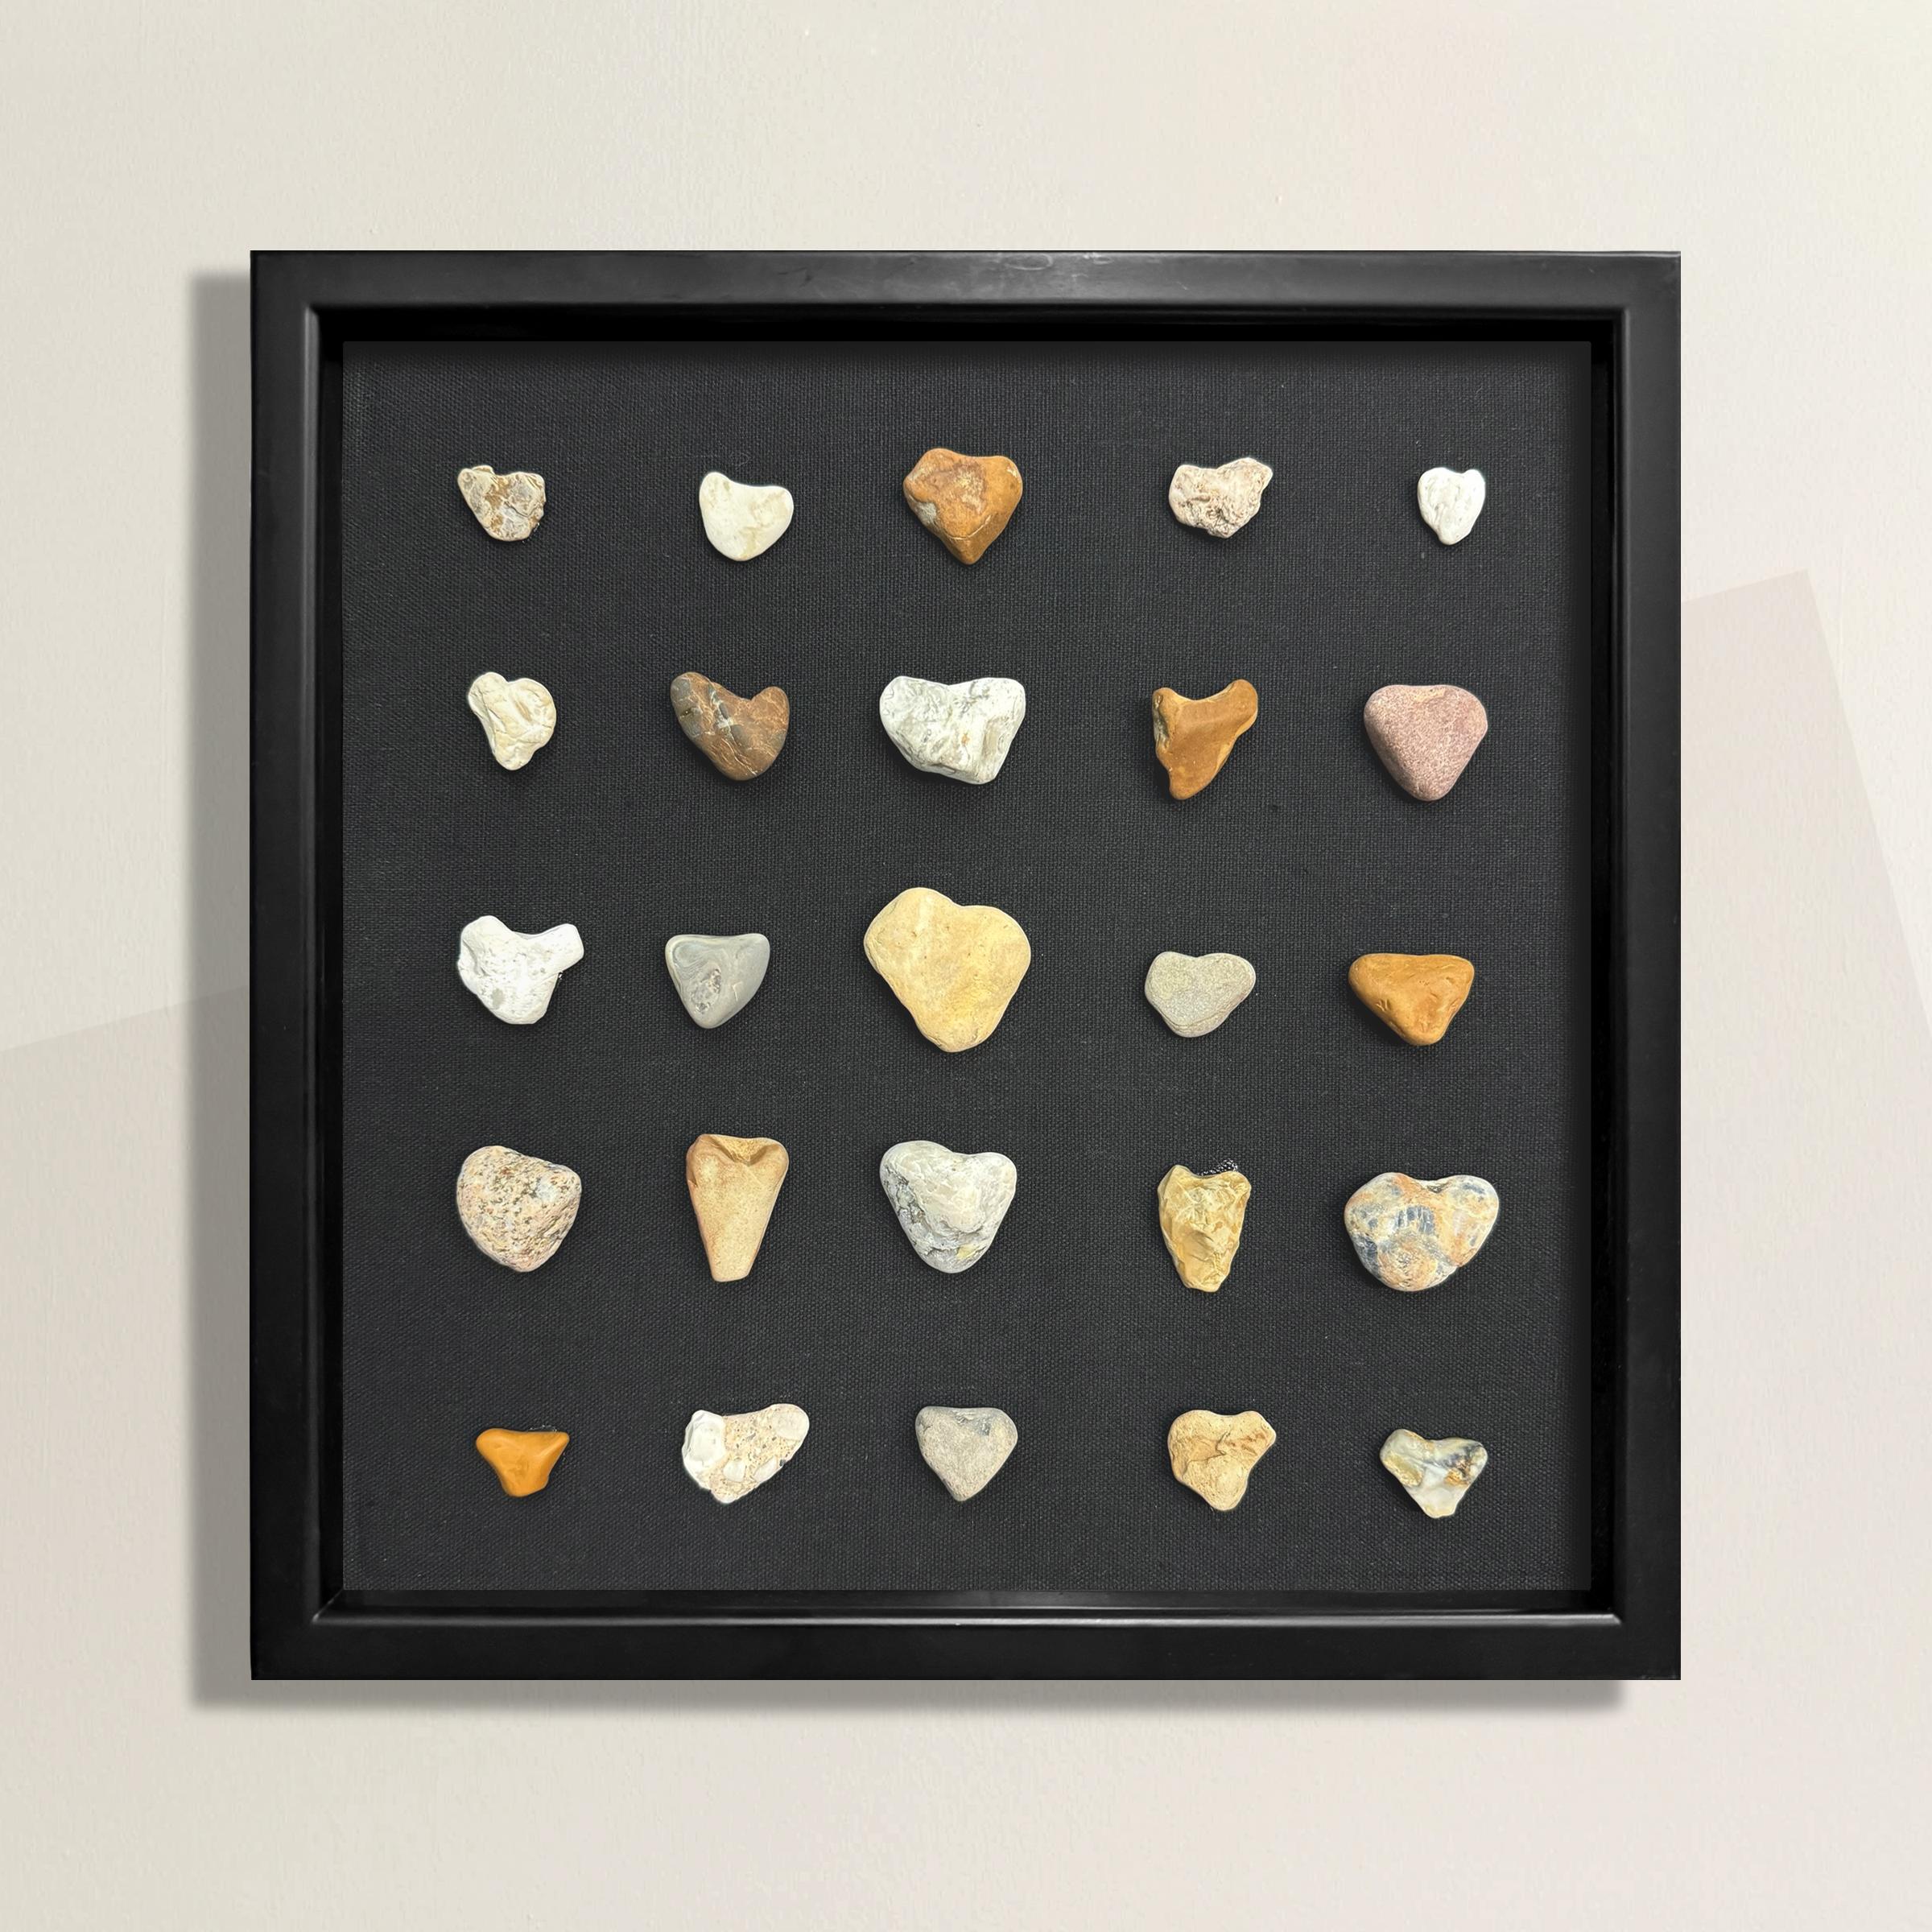 This collection of twenty-five heart-shaped stones, gathered from various beaches of Lake Michigan in Wisconsin, is a beautiful testament to the natural wonders found along its shores. Each stone, carefully collected over many trips, is as unique as